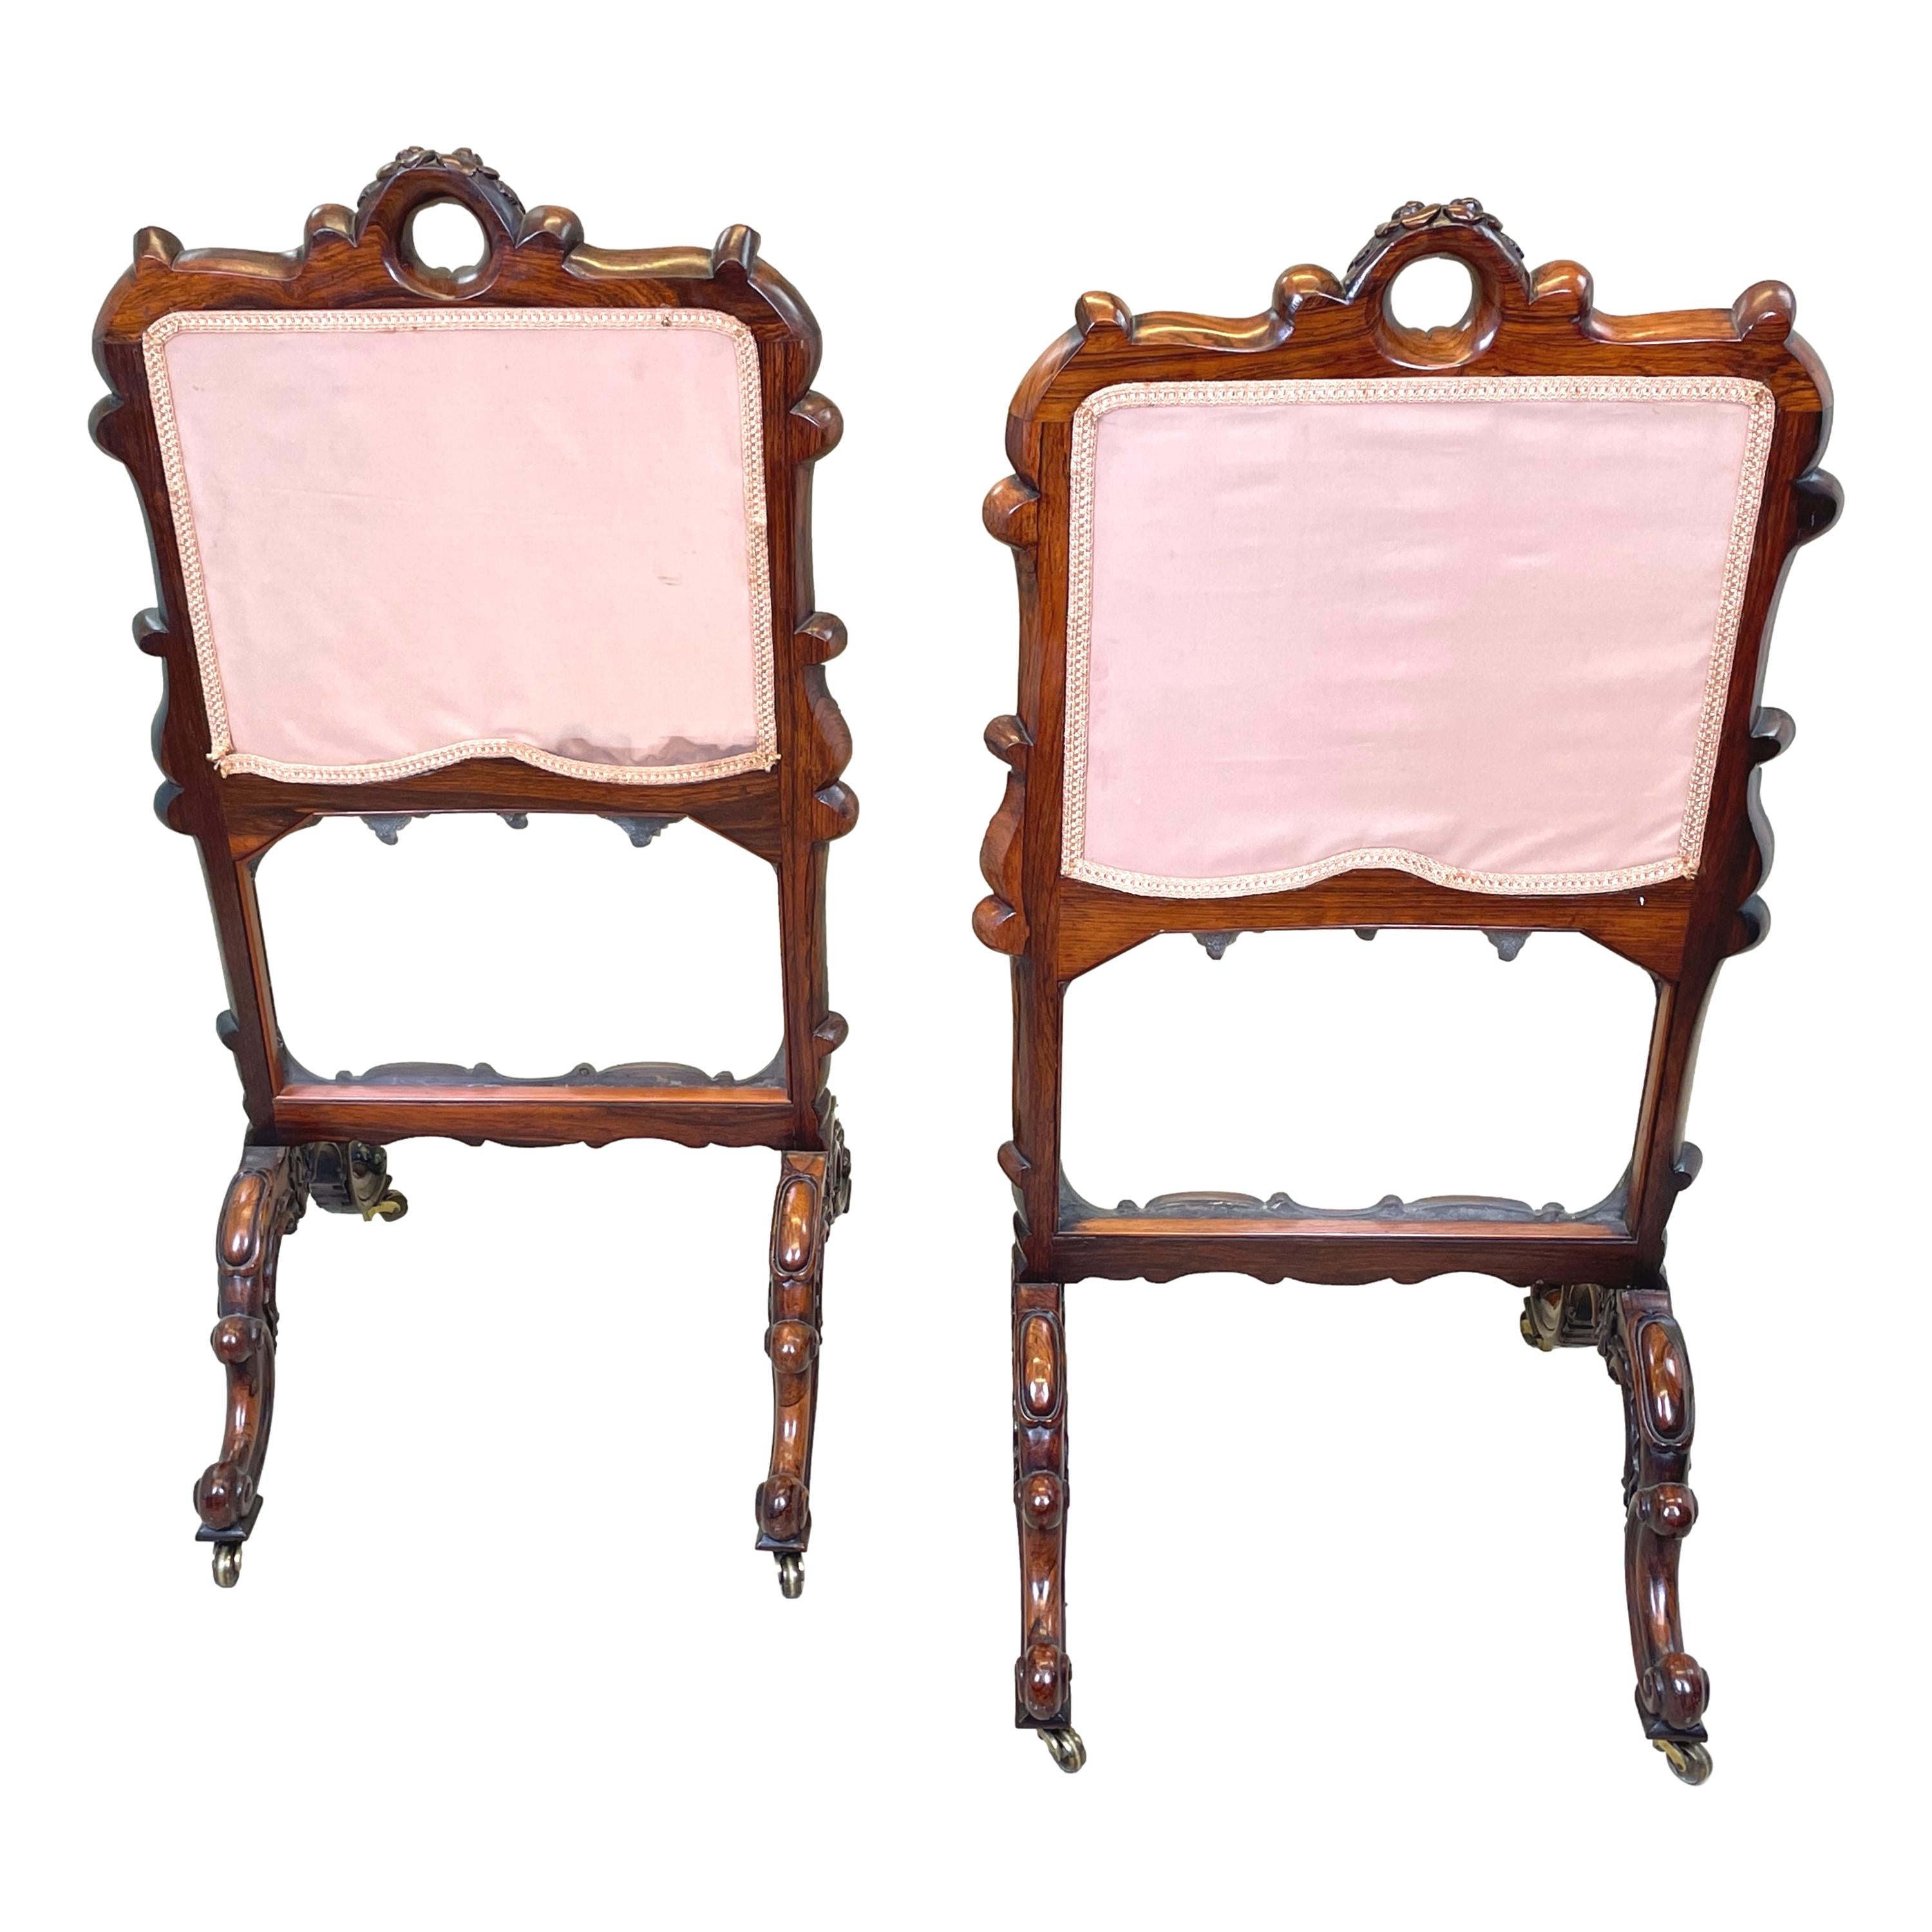 Regency 19th Century Pair of Rosewood Fire Screens For Sale 6